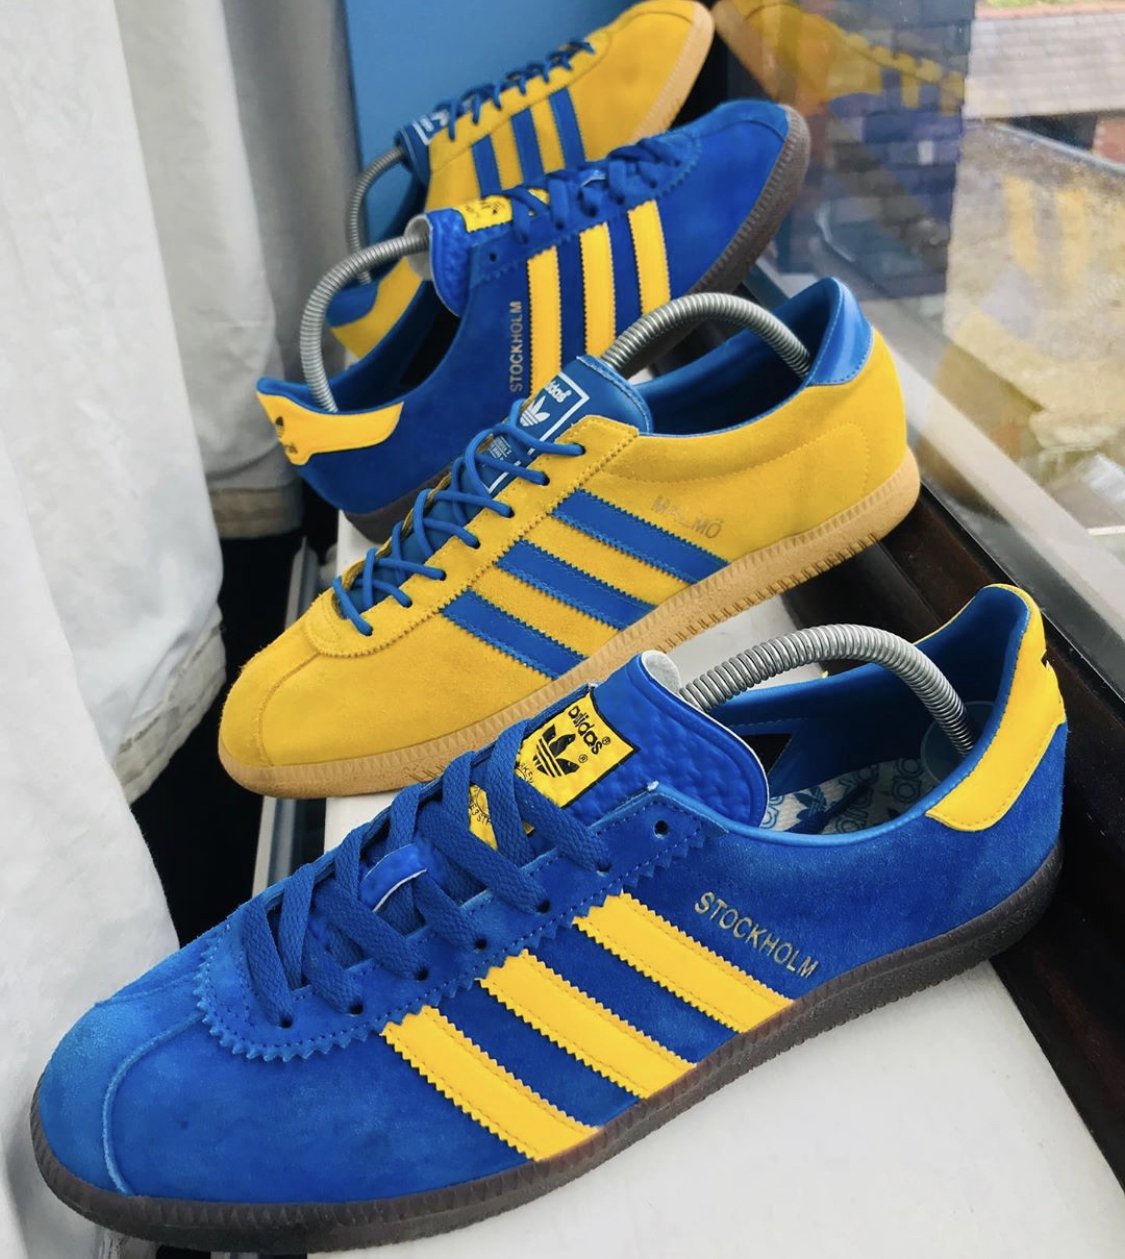 Volverse loco Sangriento deslealtad The Casuals Directory on Twitter: "Adidas Stockholm and Malmo /// Pic  Credit: @robxhough instagram https://t.co/36P80iOe3j" / Twitter